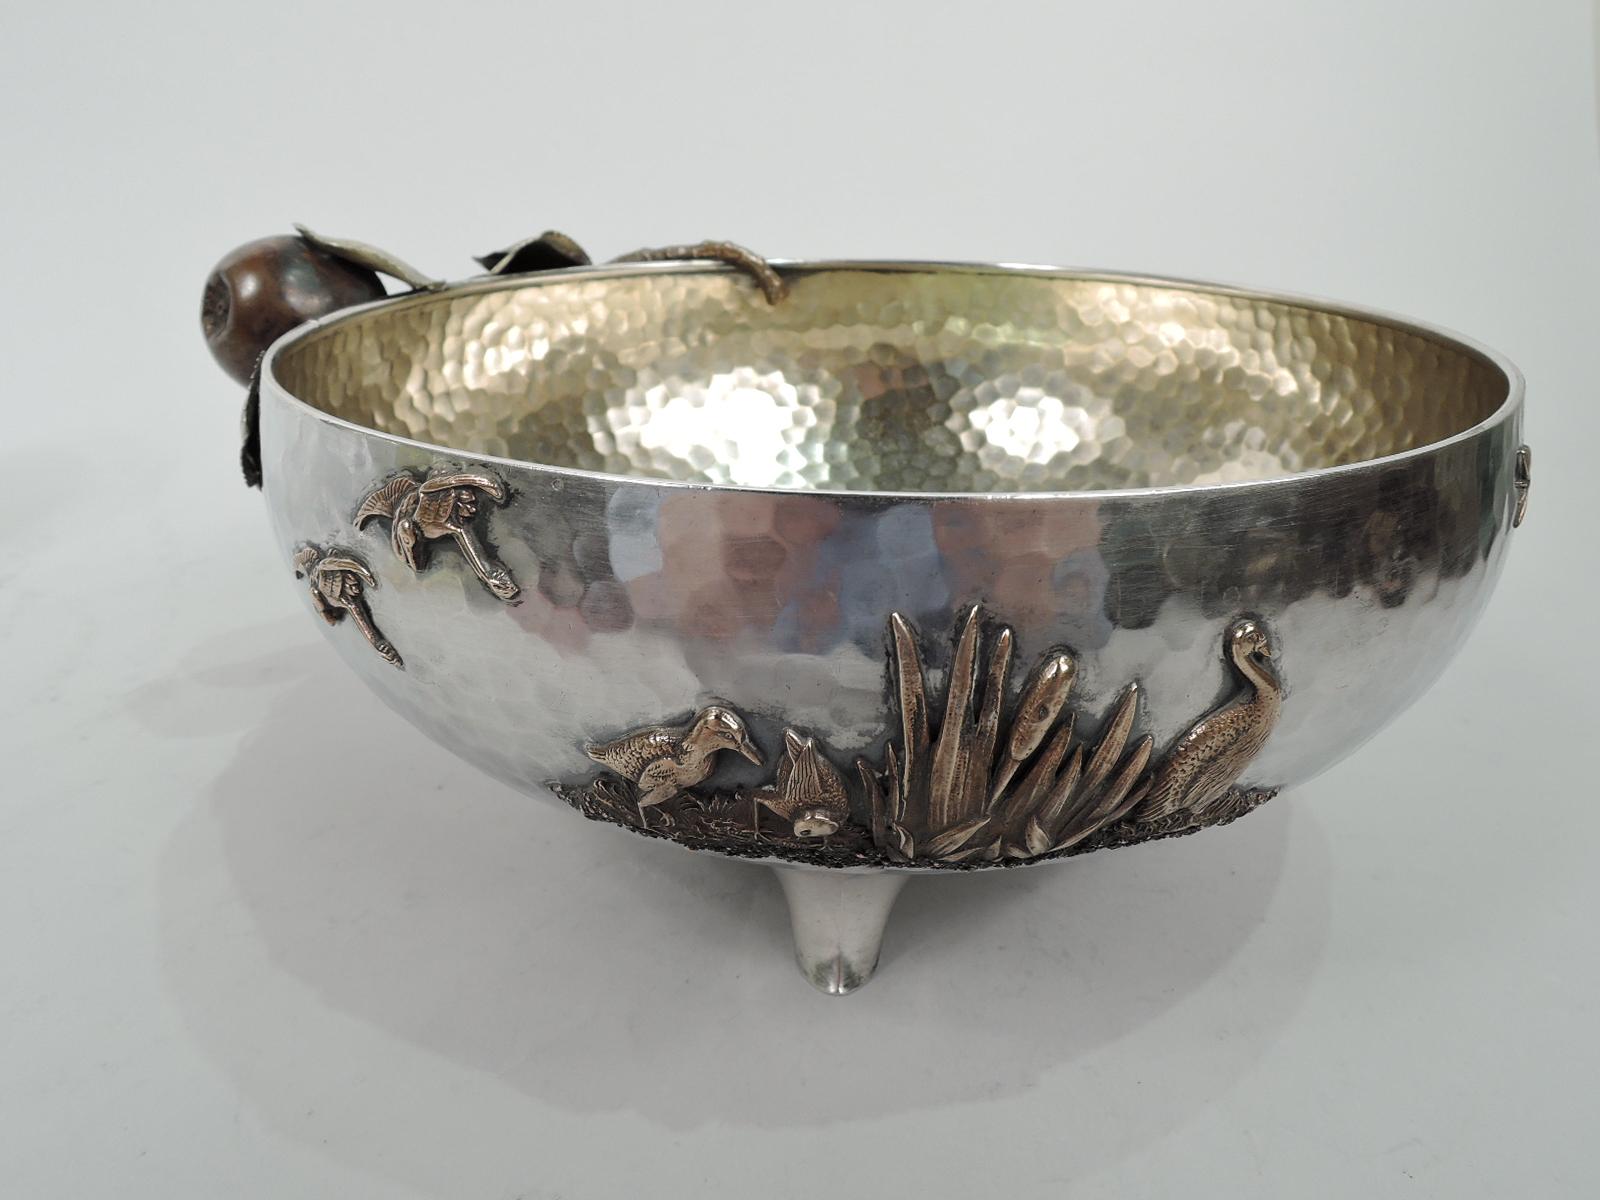 Japonesque mixed metal on sterling silver bowl. Made by Gorham in Providence in 1883. Curved sides with allover spot hammering and gilt-washed interior overhung with apple branch mounted to exterior. A gnarly growth with irregular fruit and gilt